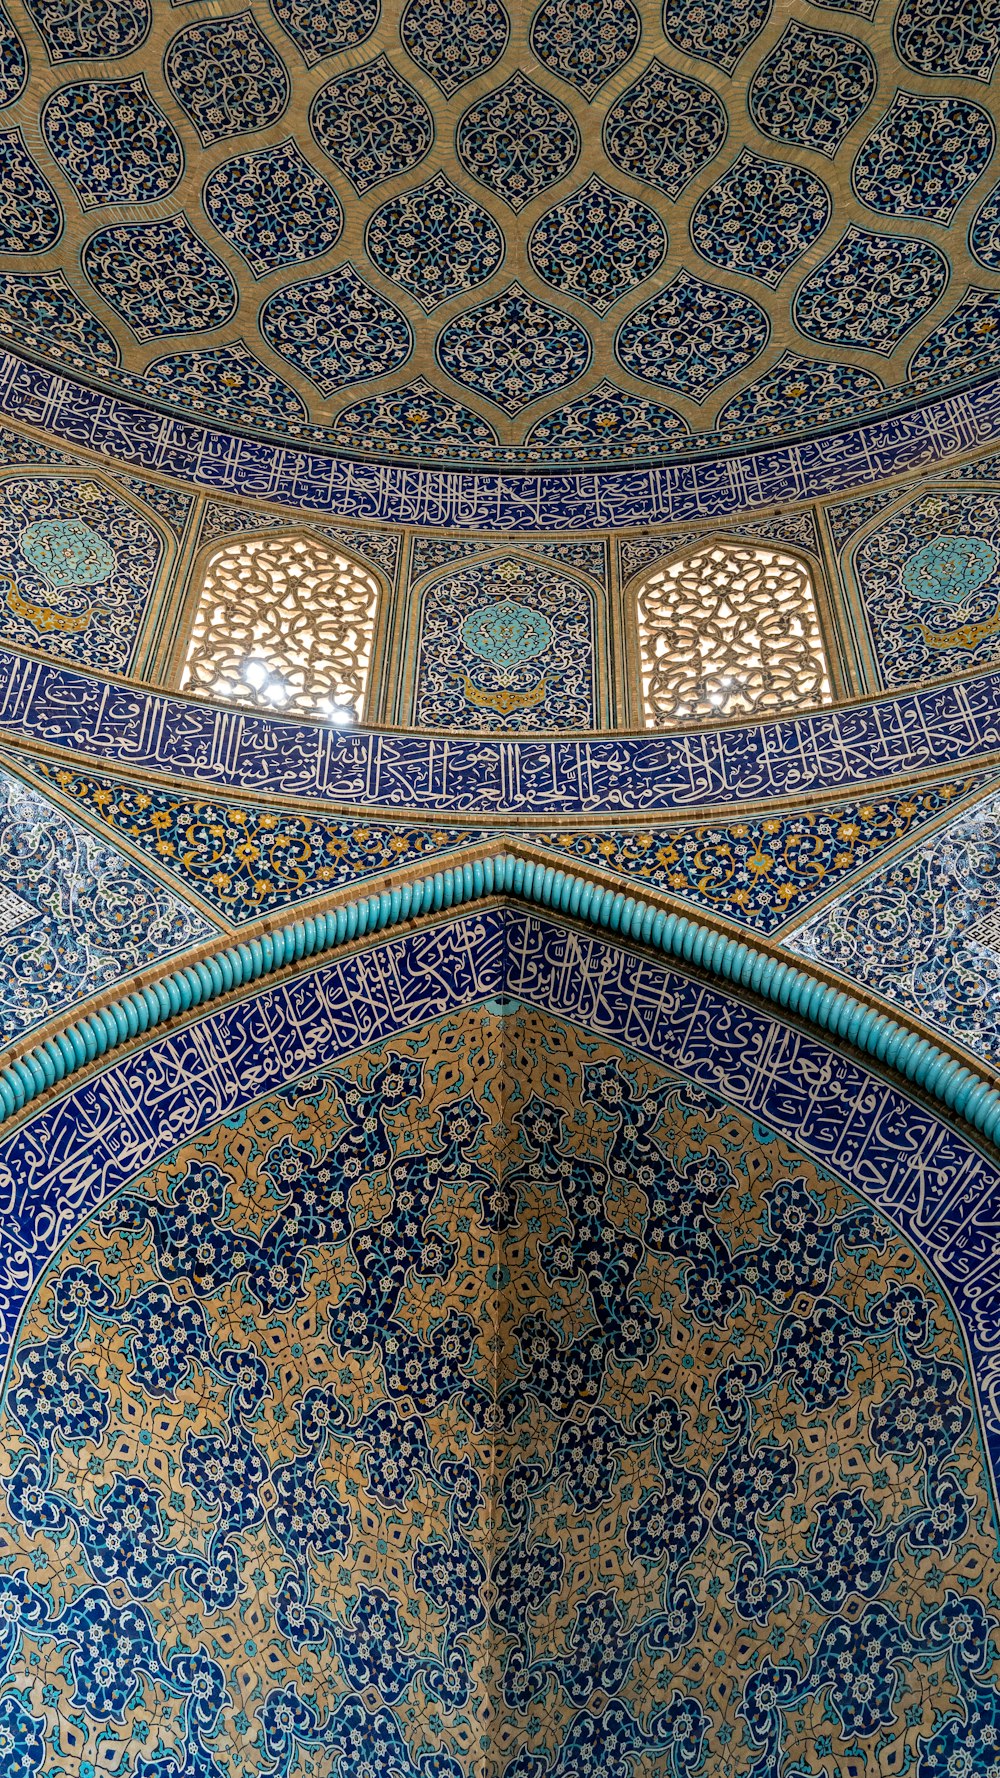 the ceiling of a building with blue and gold tiles